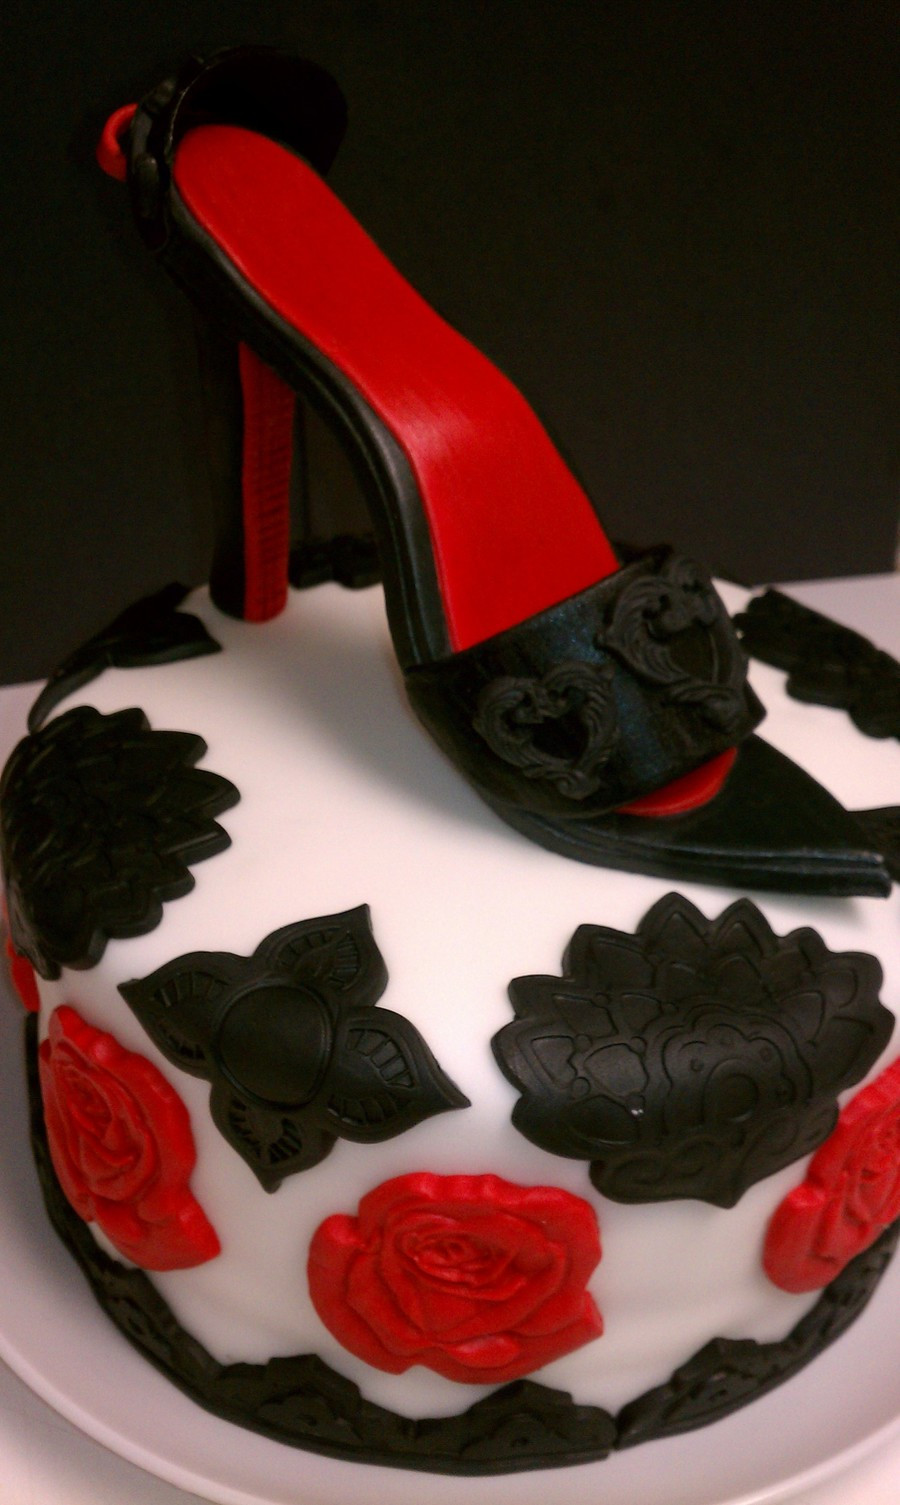 High Heel Birthday Cake
 High Heel Birthday Cake CakeCentral